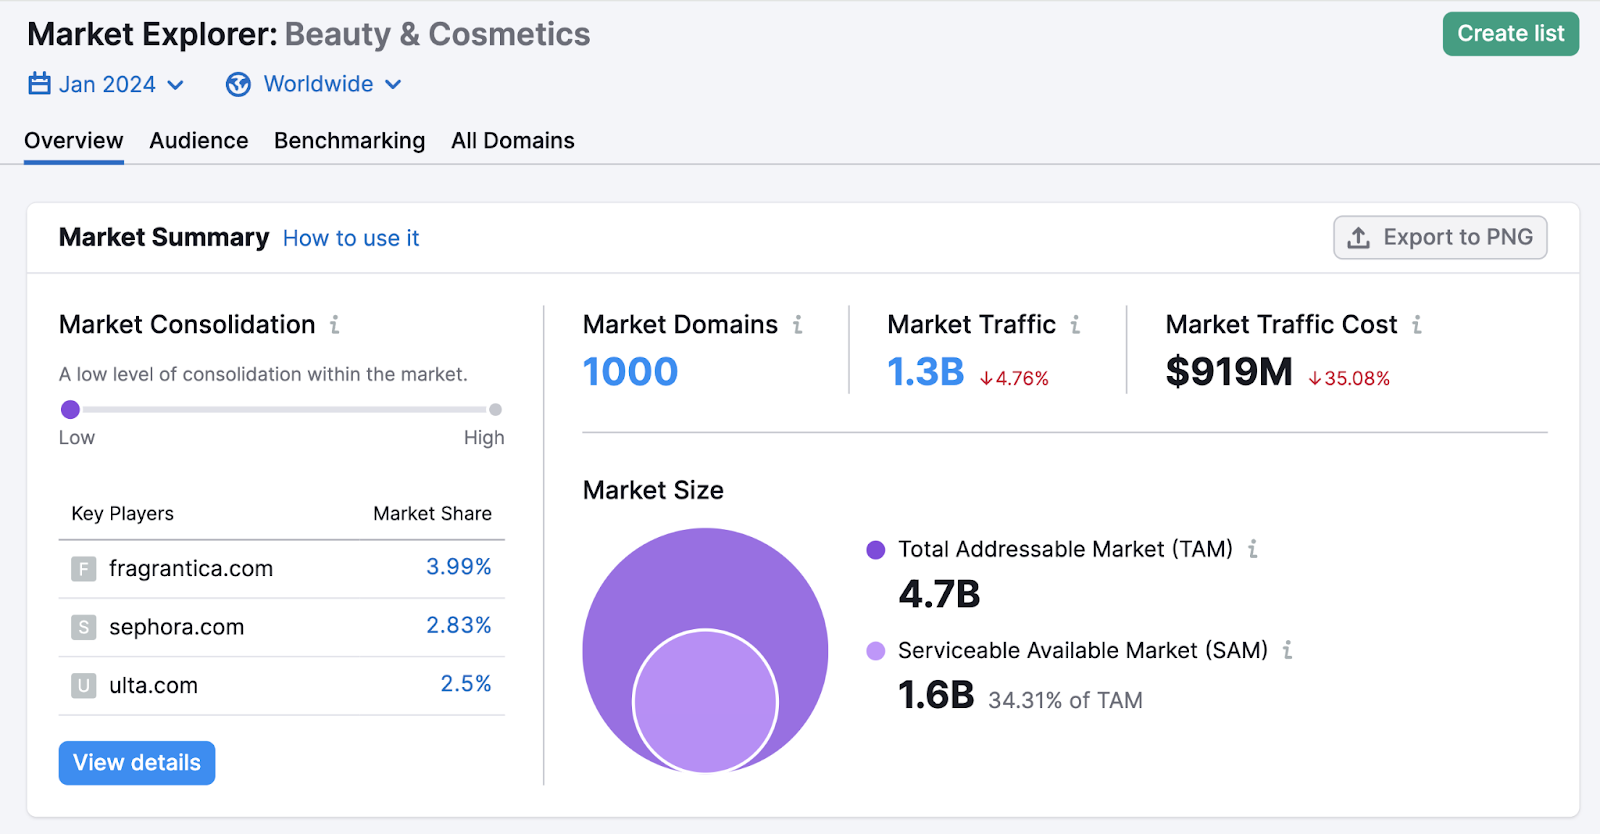 Market summary dashboard for beauty & cosmetics in the Market Explorer tool